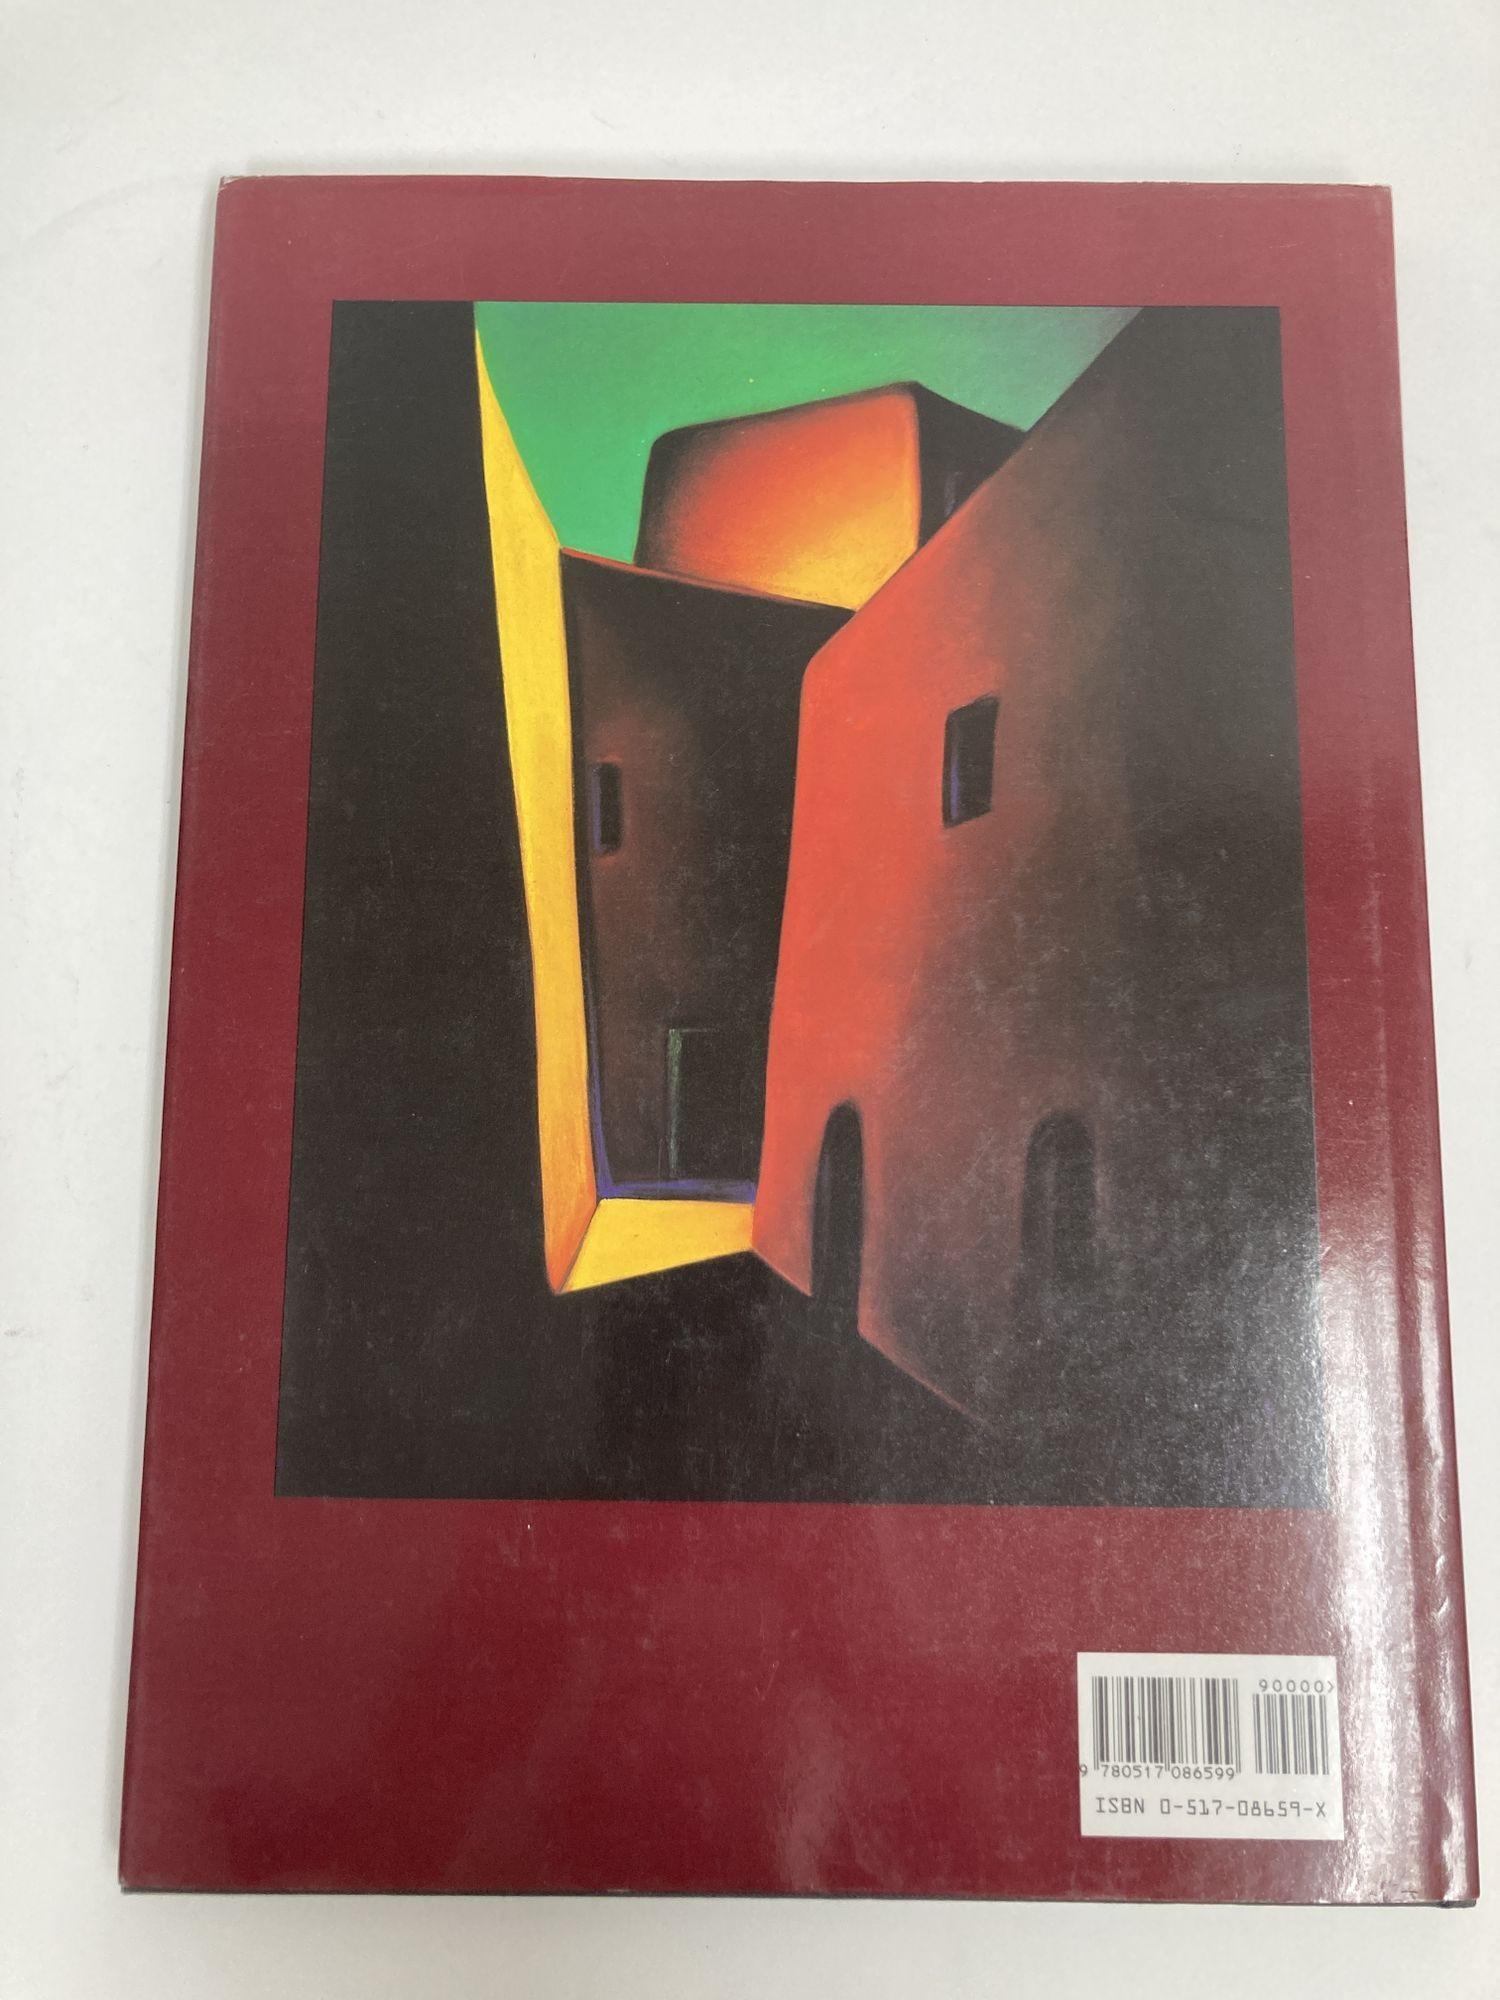 American Santa Fe Art. Ellis, Simone, Published by Crescent Books., New York., 1993 Large For Sale